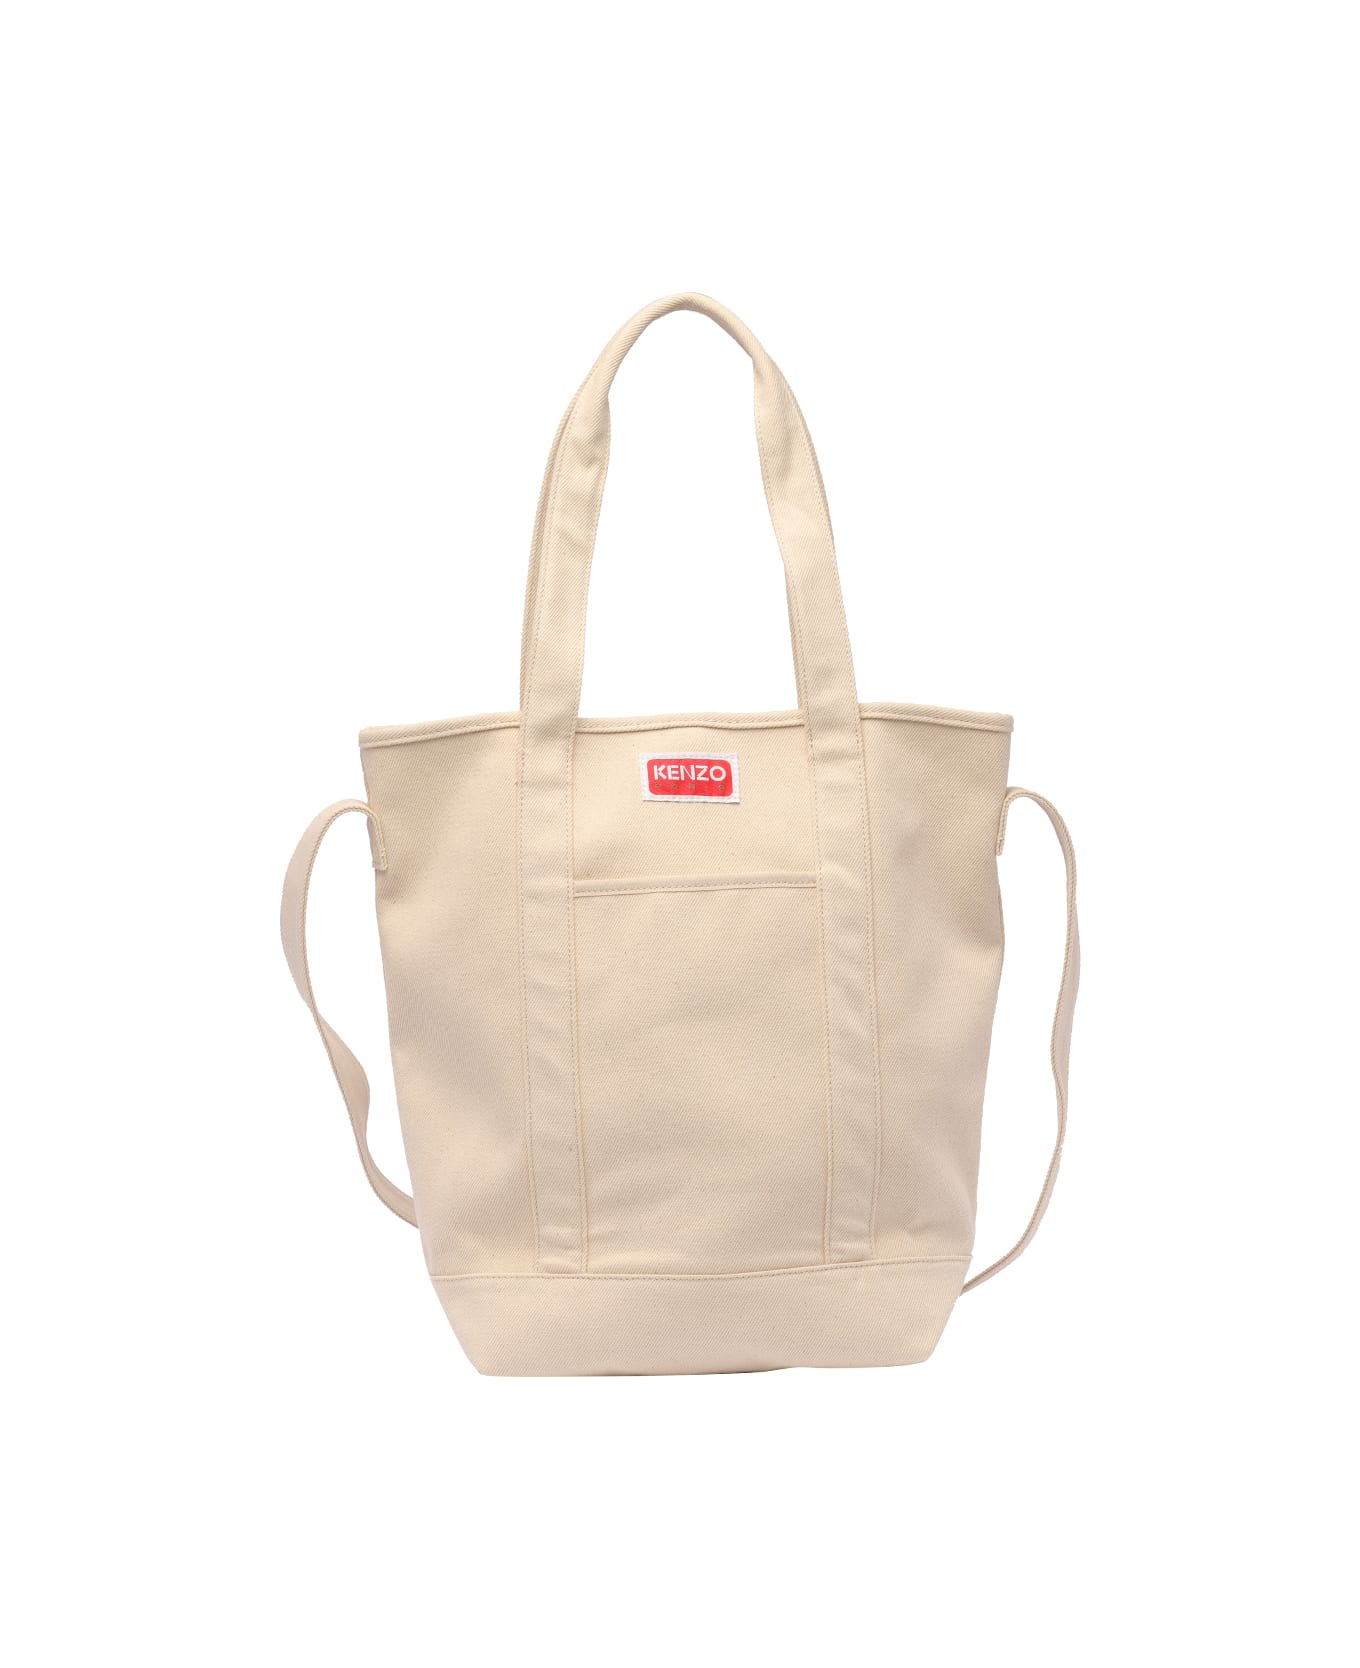 Kenzo Logo Patched Tote - Beige トートバッグ